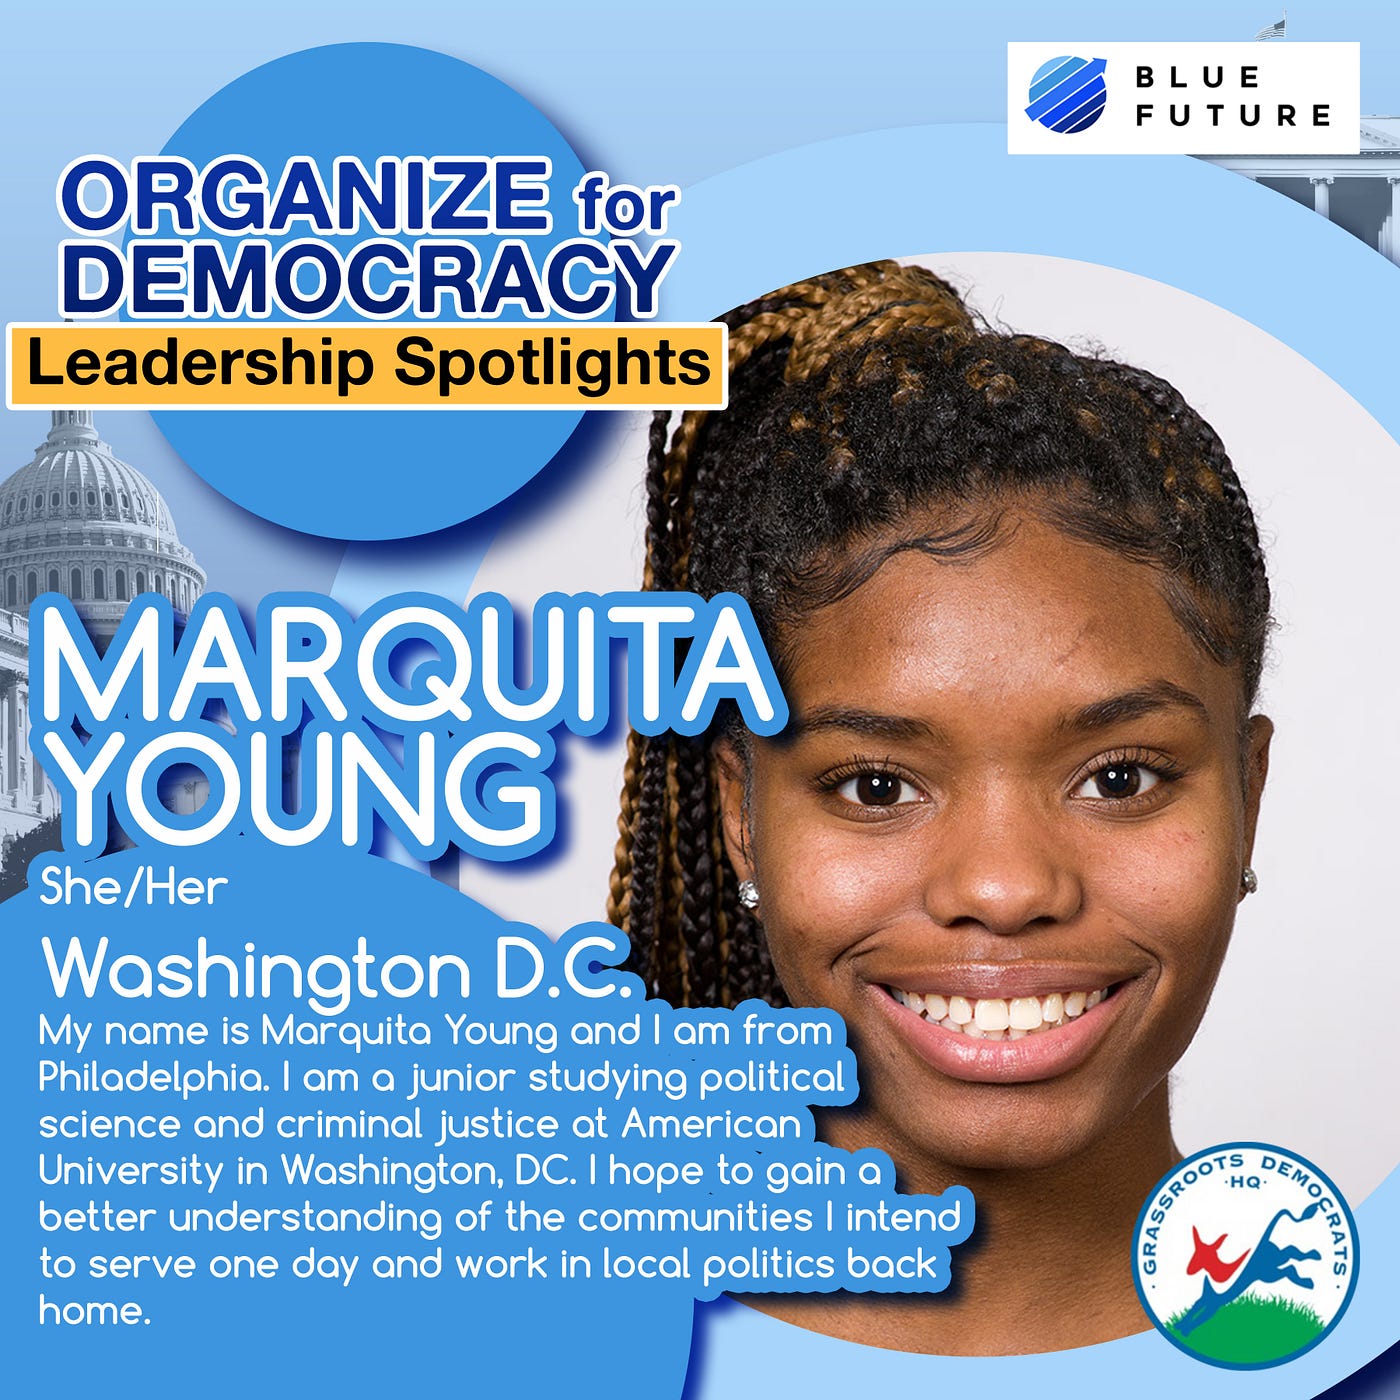 Smiling Black girl against a blue background and picture of the Capitol. Organize for Democracy Leadership Spotlights: Marquita Young (she/her) from Washington, D.C. “My name is Marquita Young, and I am from Philadelphia. I am a junior studying political science and criminal justice at American University in Washington, D.C. I hope to gain a better understanding of the communities I intend to serve one day and work in local politics back home.”